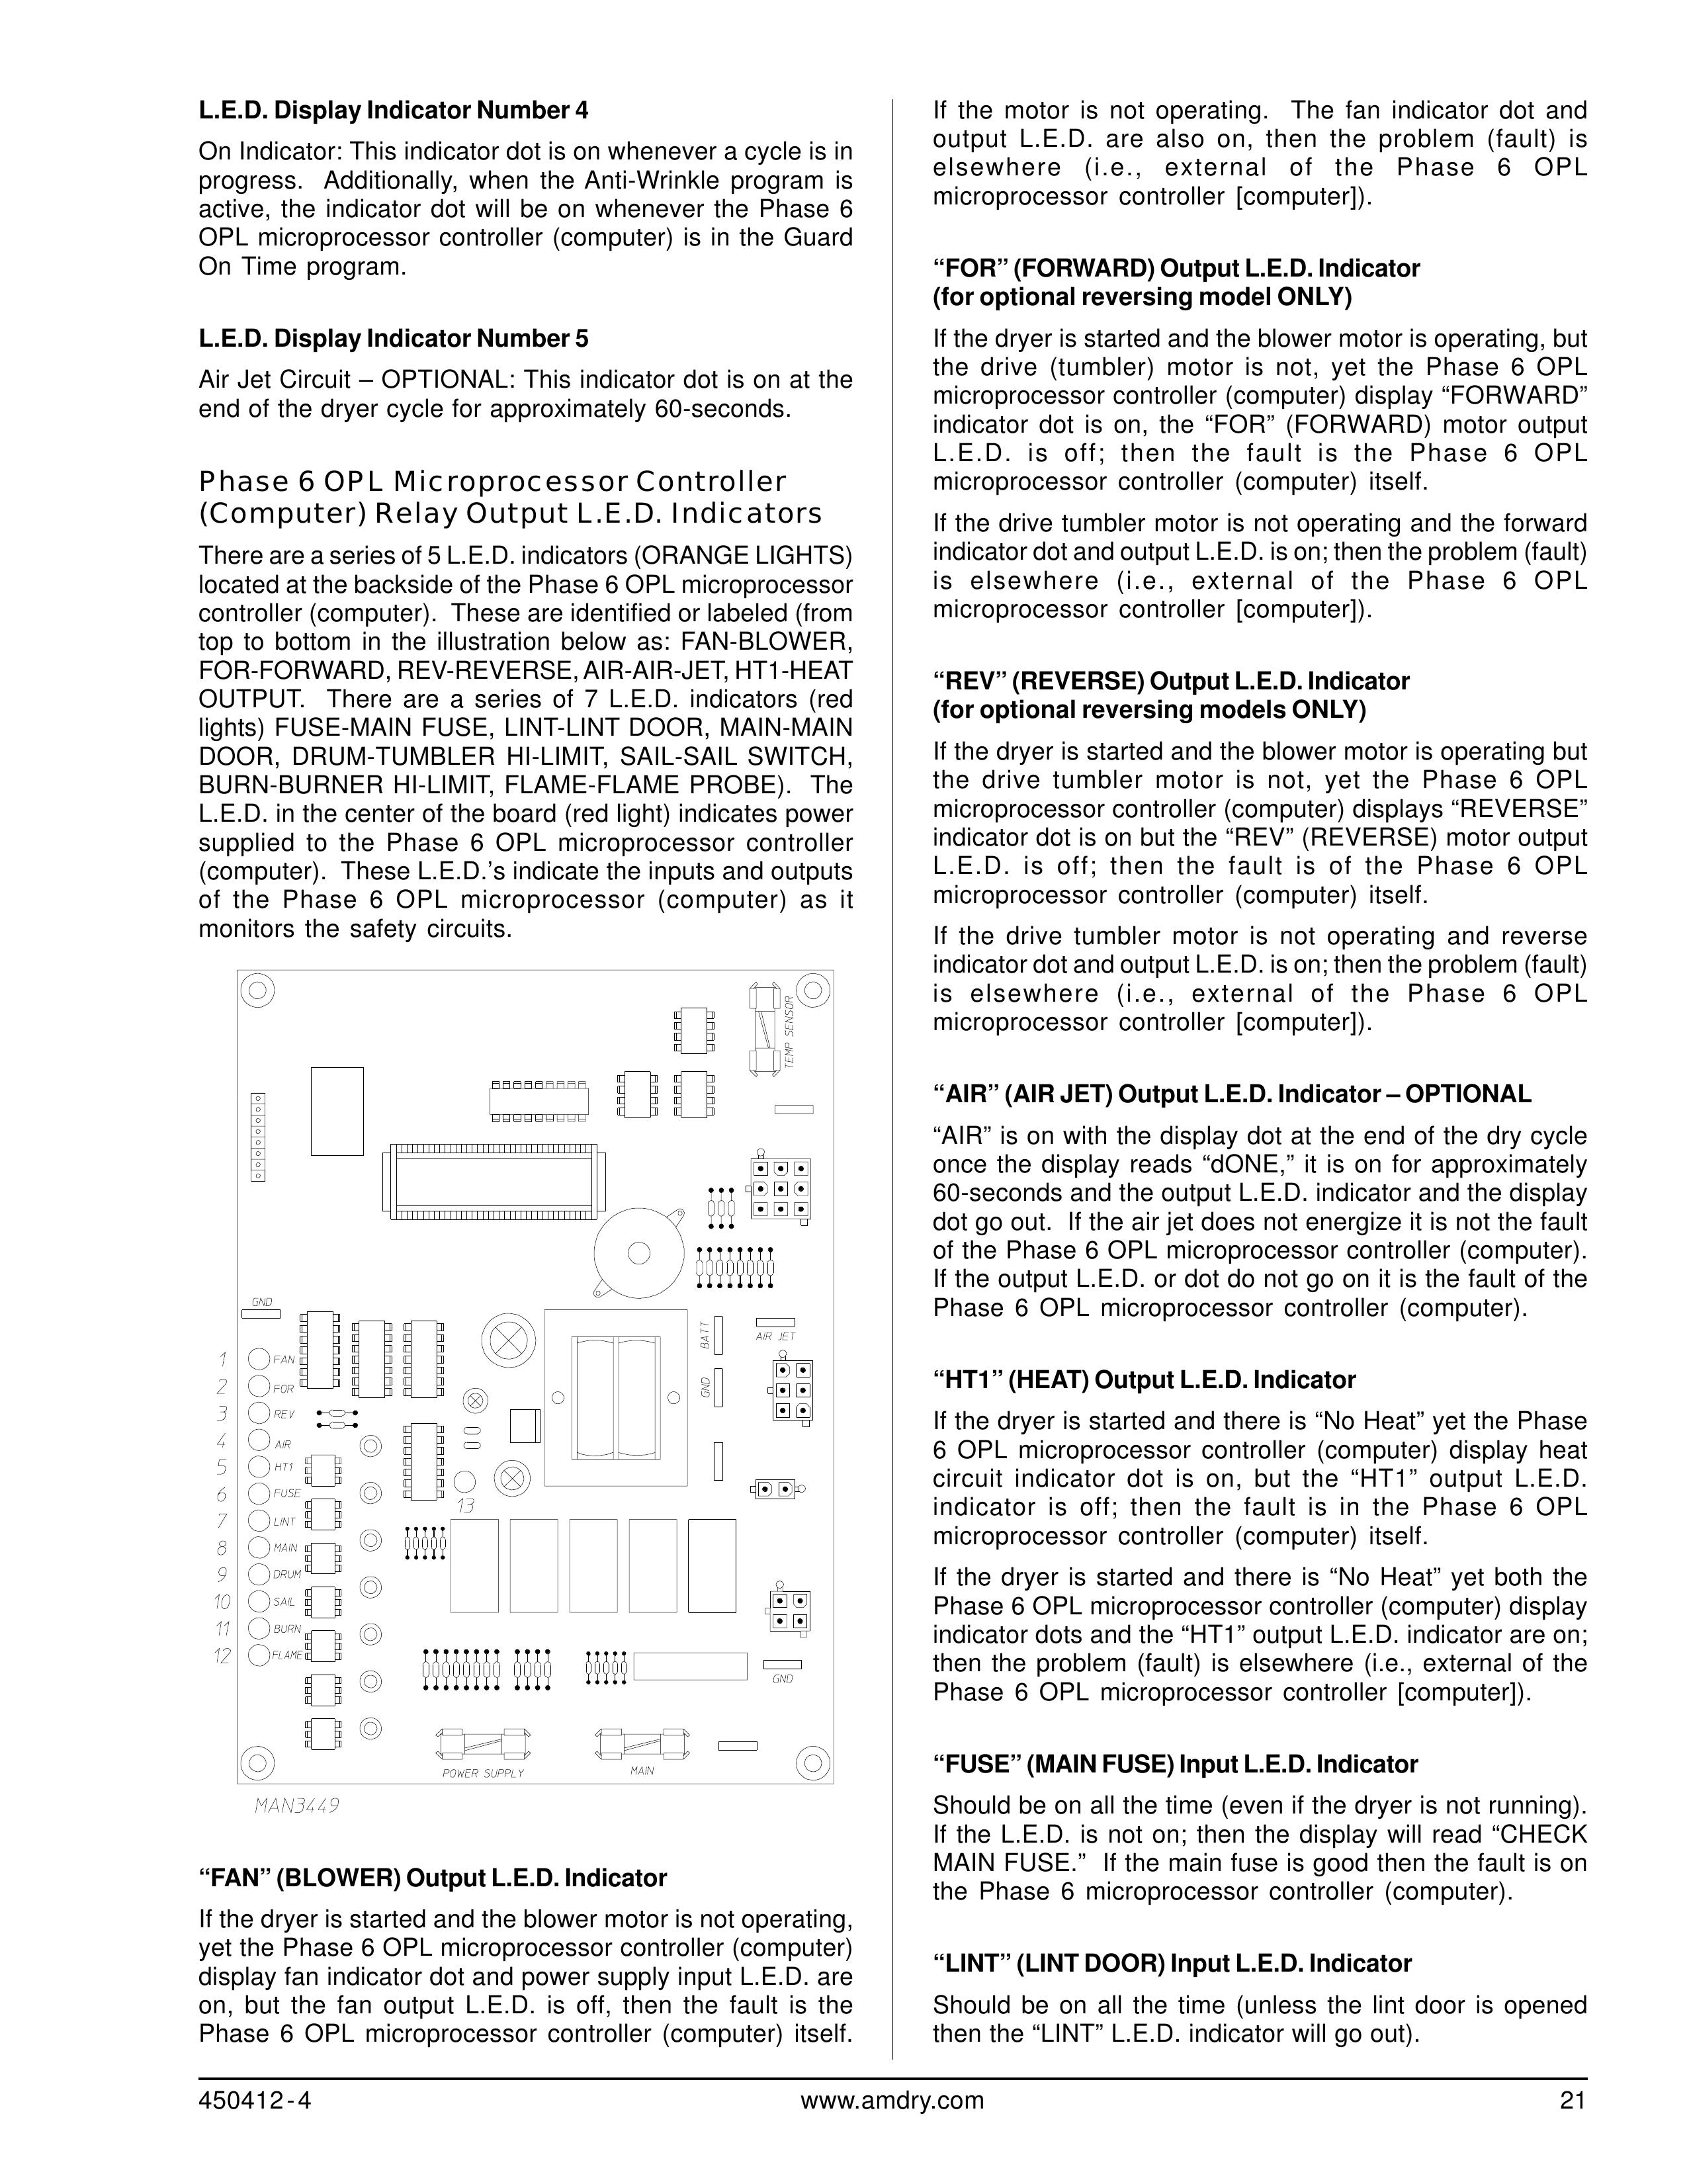 ADC ML-122 Clothes Dryer User Manual (Page 21)